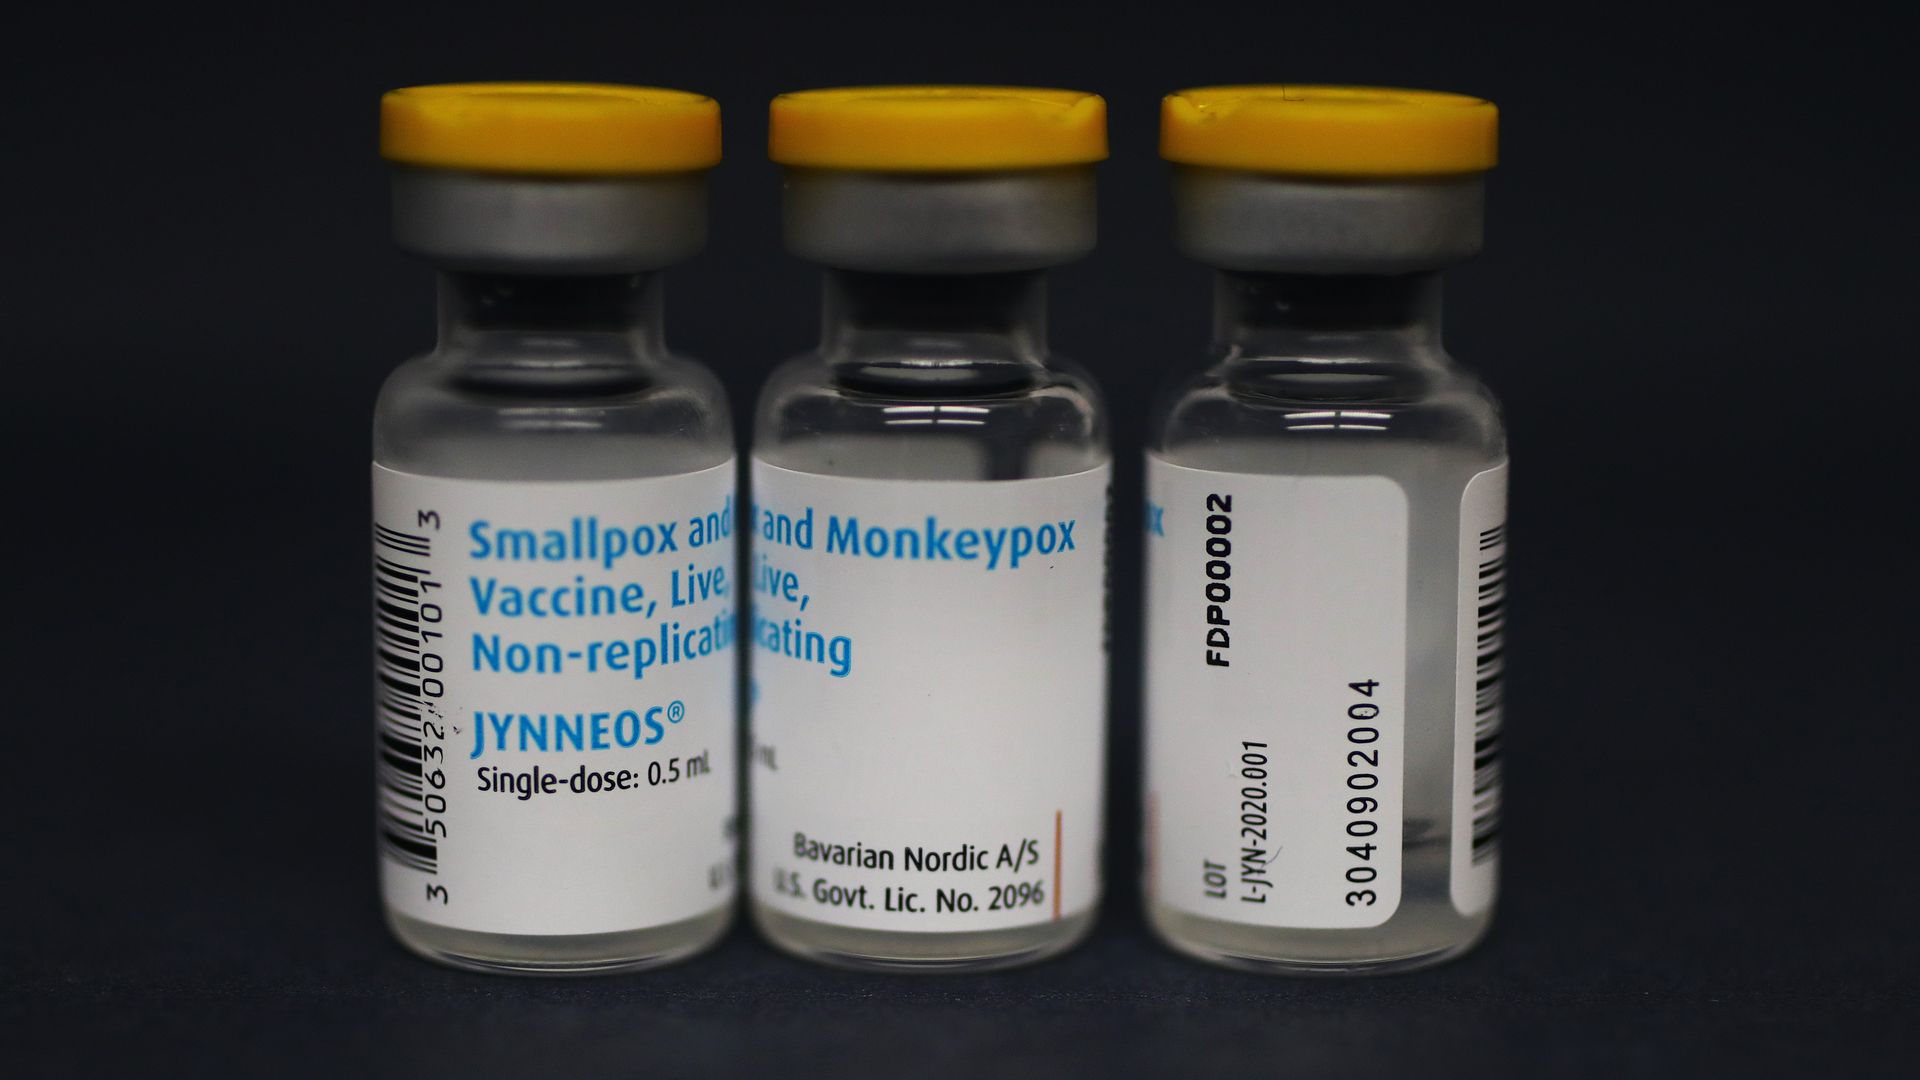 Doses of the Smallpox and Monkeypox Vaccine, by the company Jynneos.